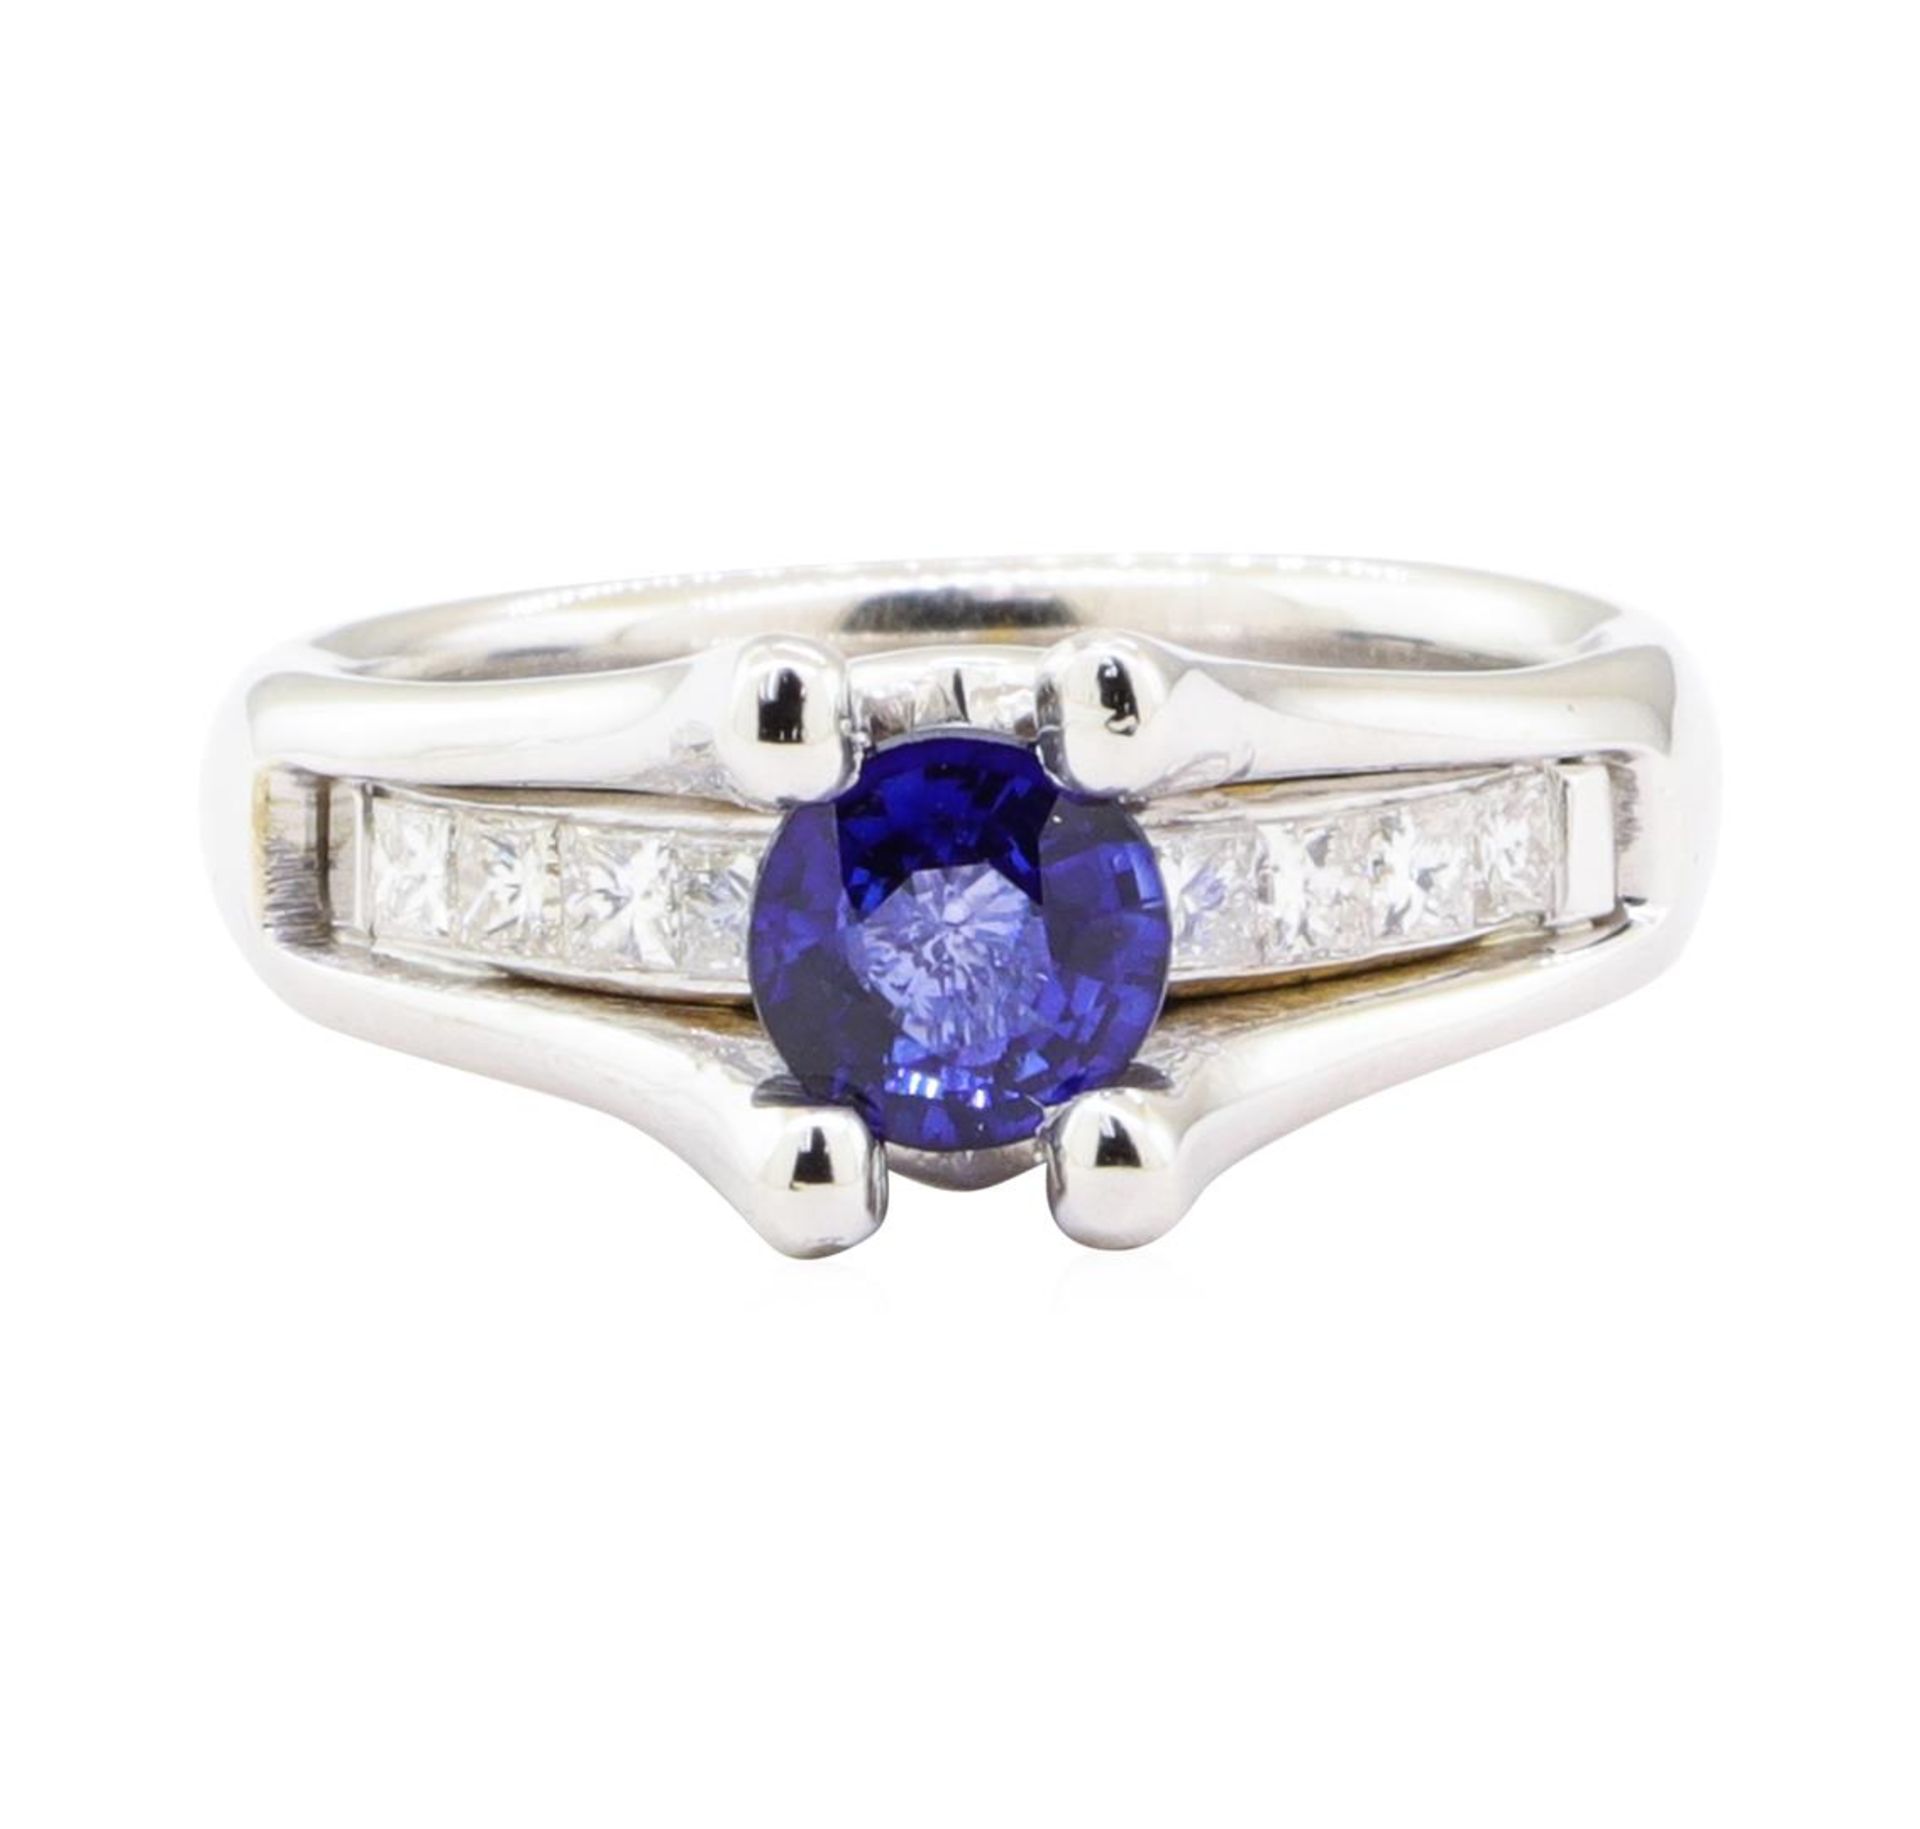 1.28 ctw Sapphire And Diamond Ring - 14KT White Gold - Image 2 of 5